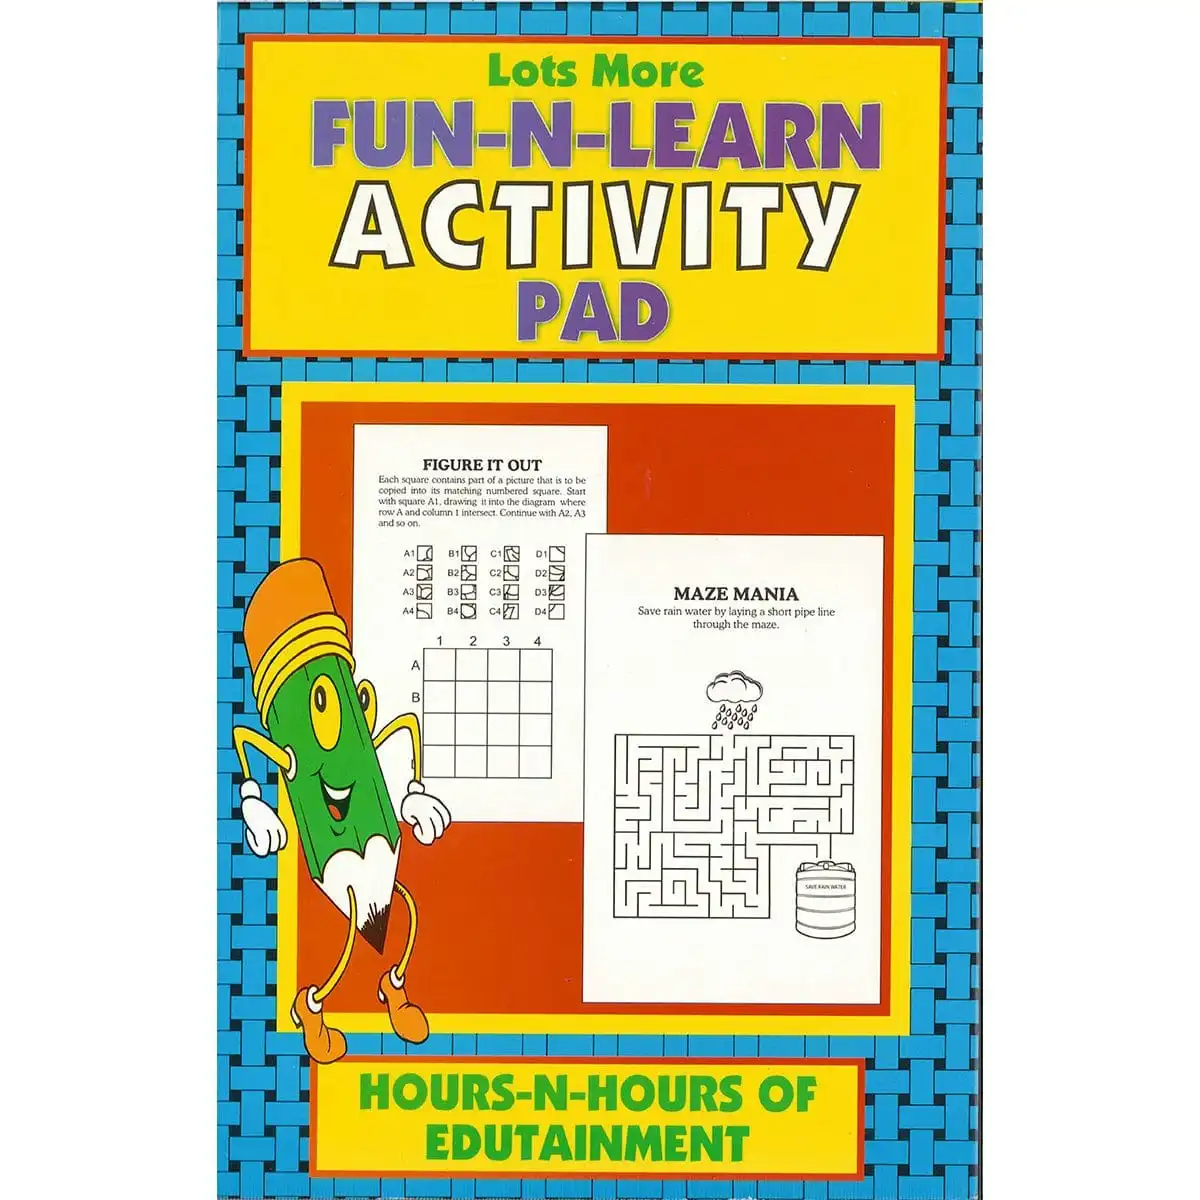 Fun-N-Learn Lots More Activity Pad